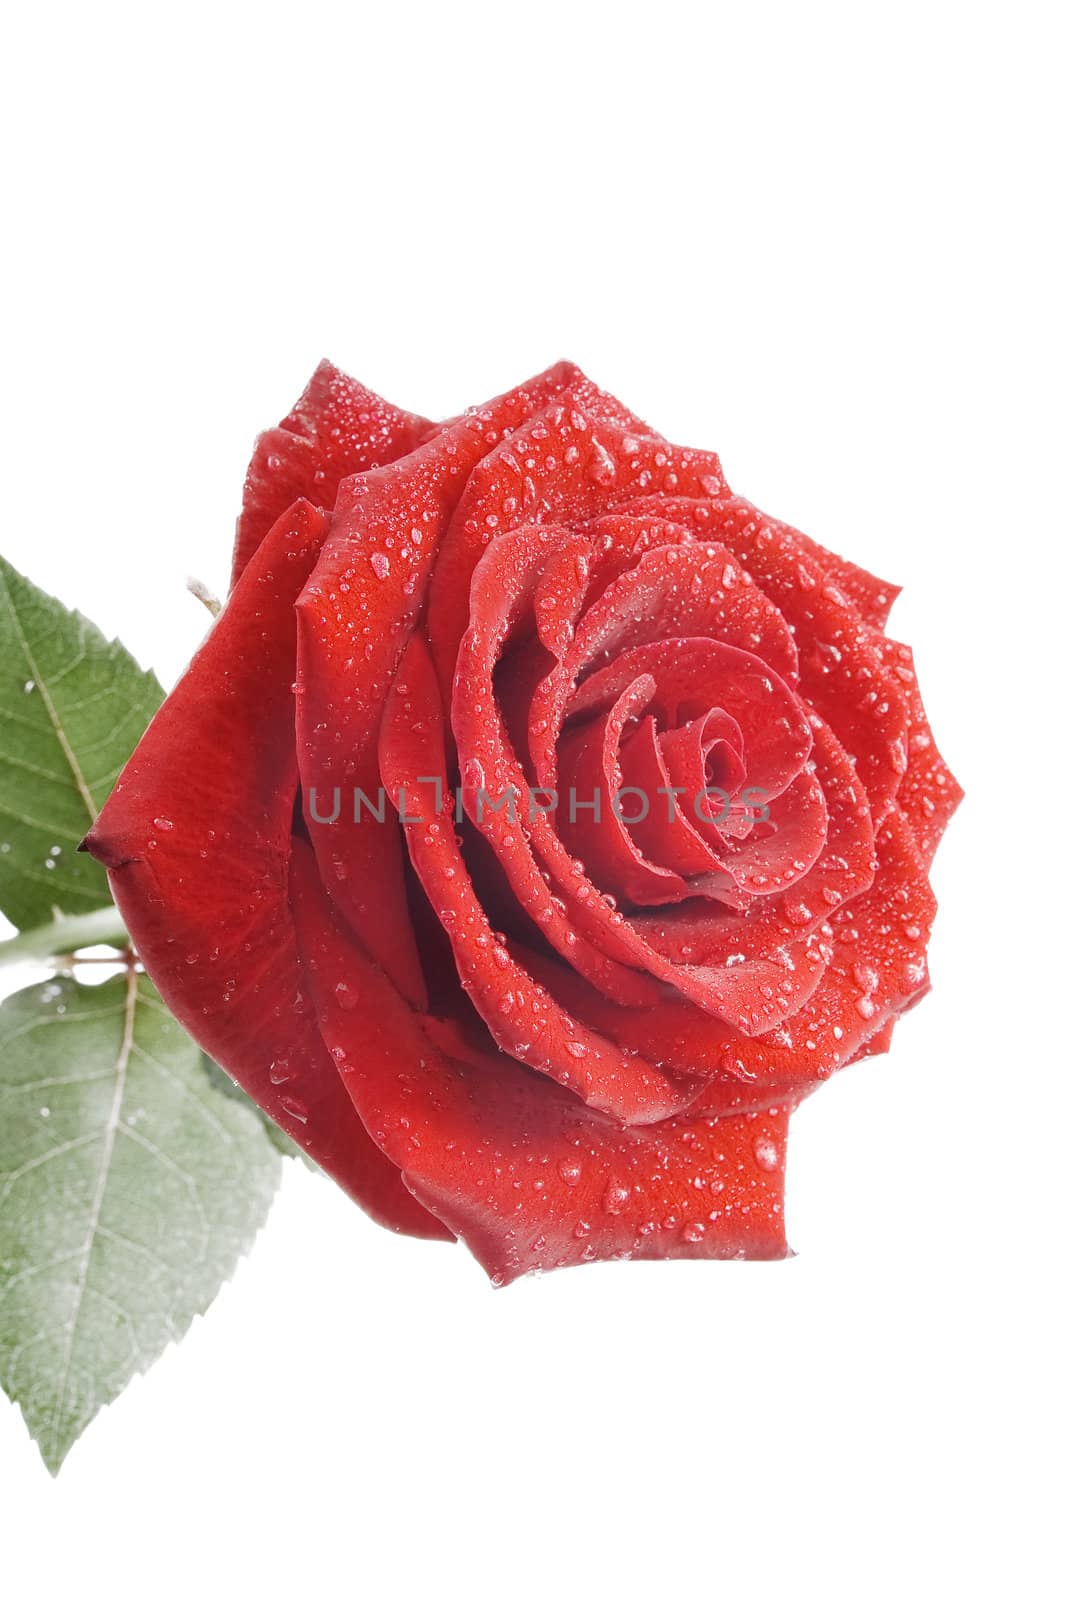 Red rose with water drops isplated on the white background